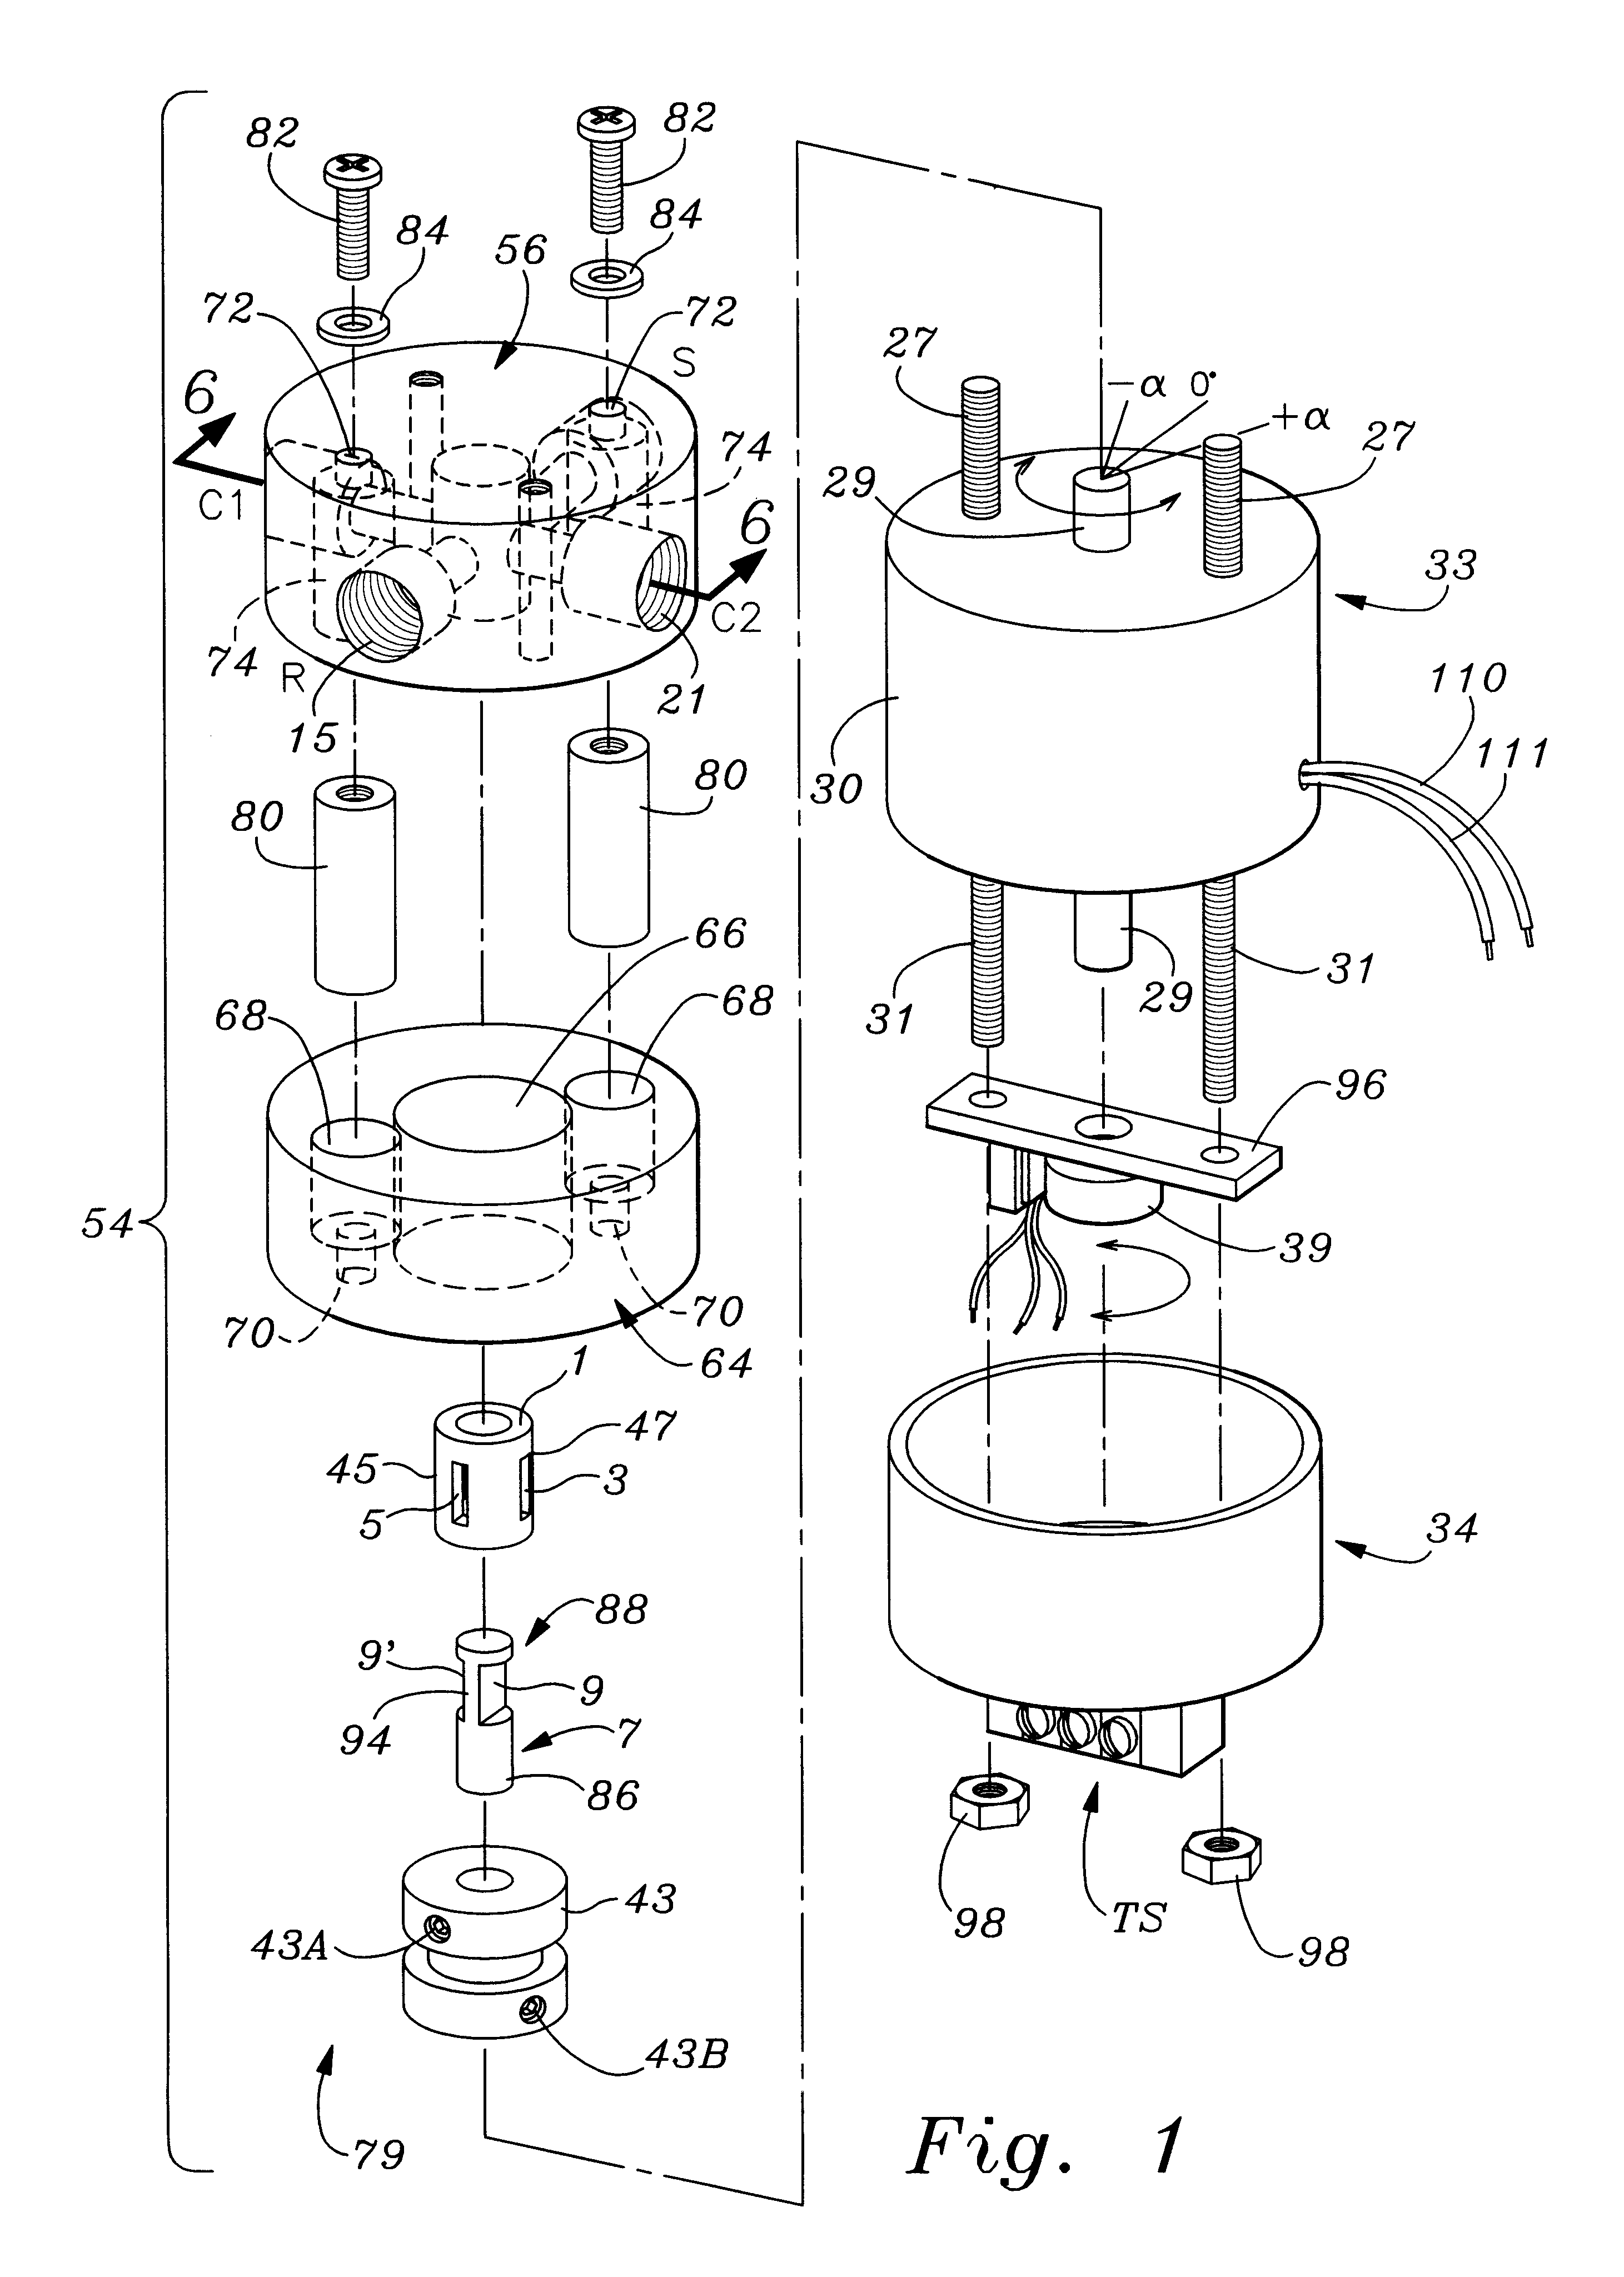 Rotary servovalve and control system